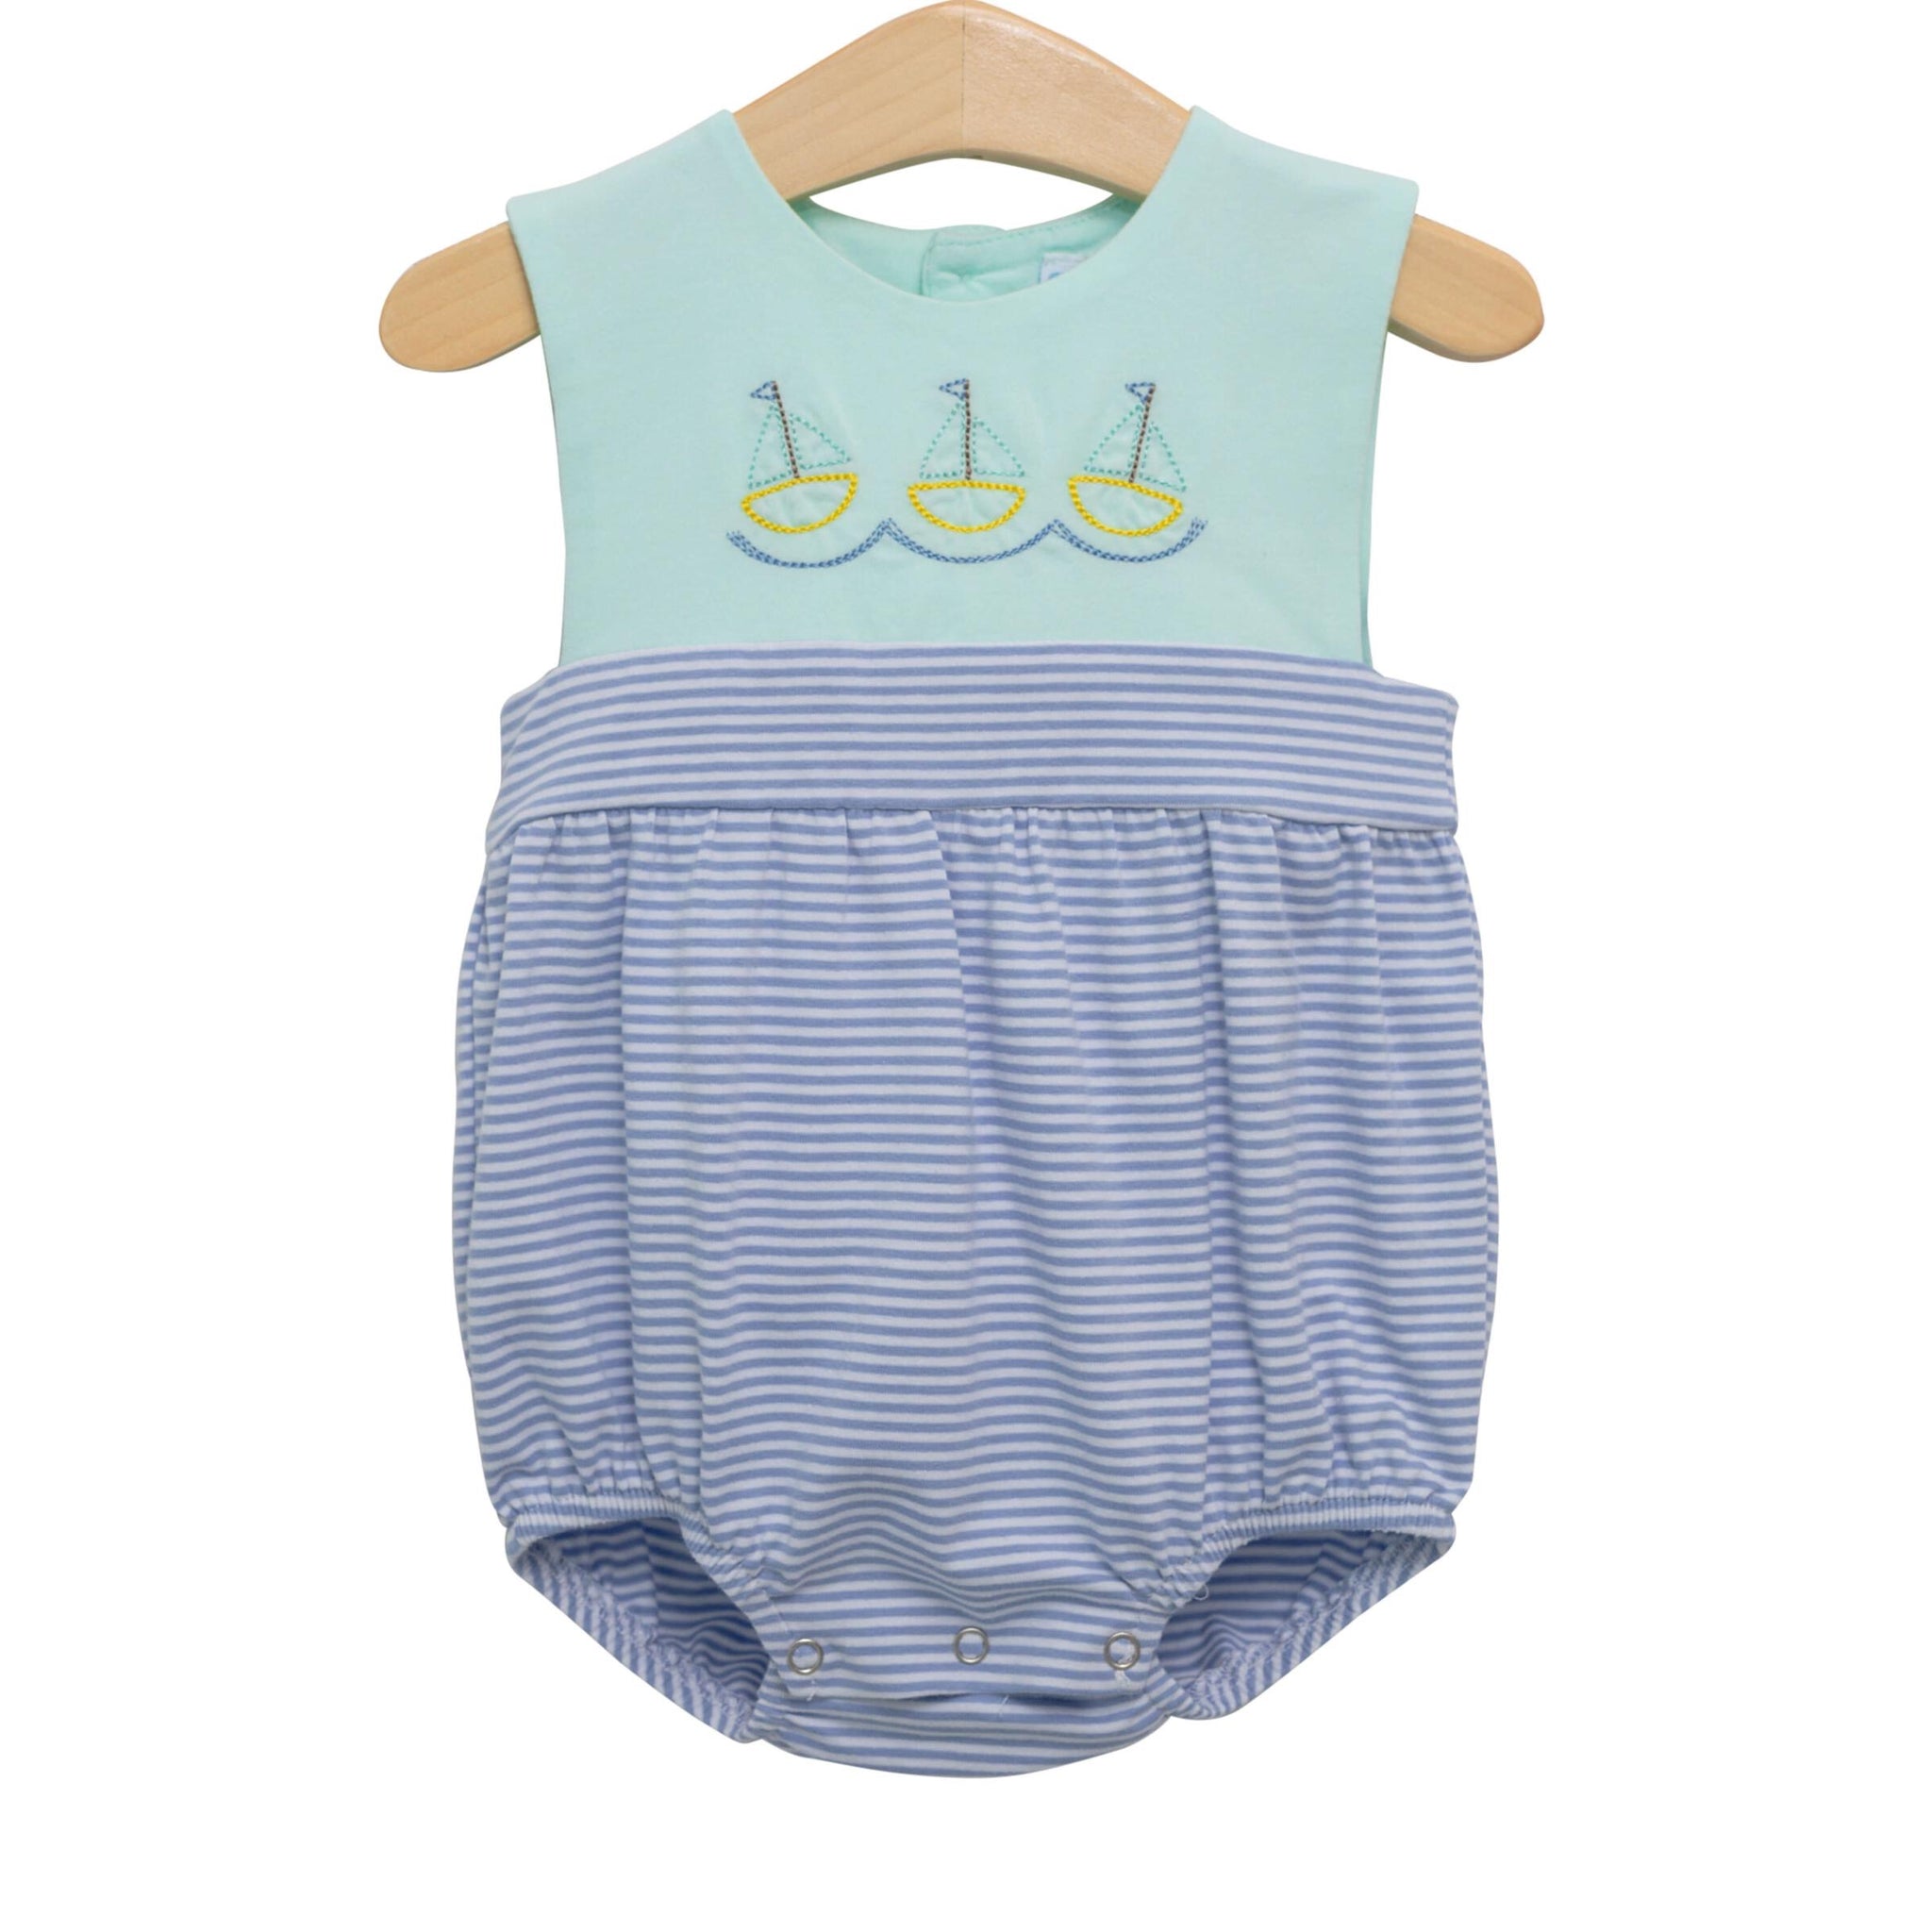 Sailboat Embroidery Sunsuit